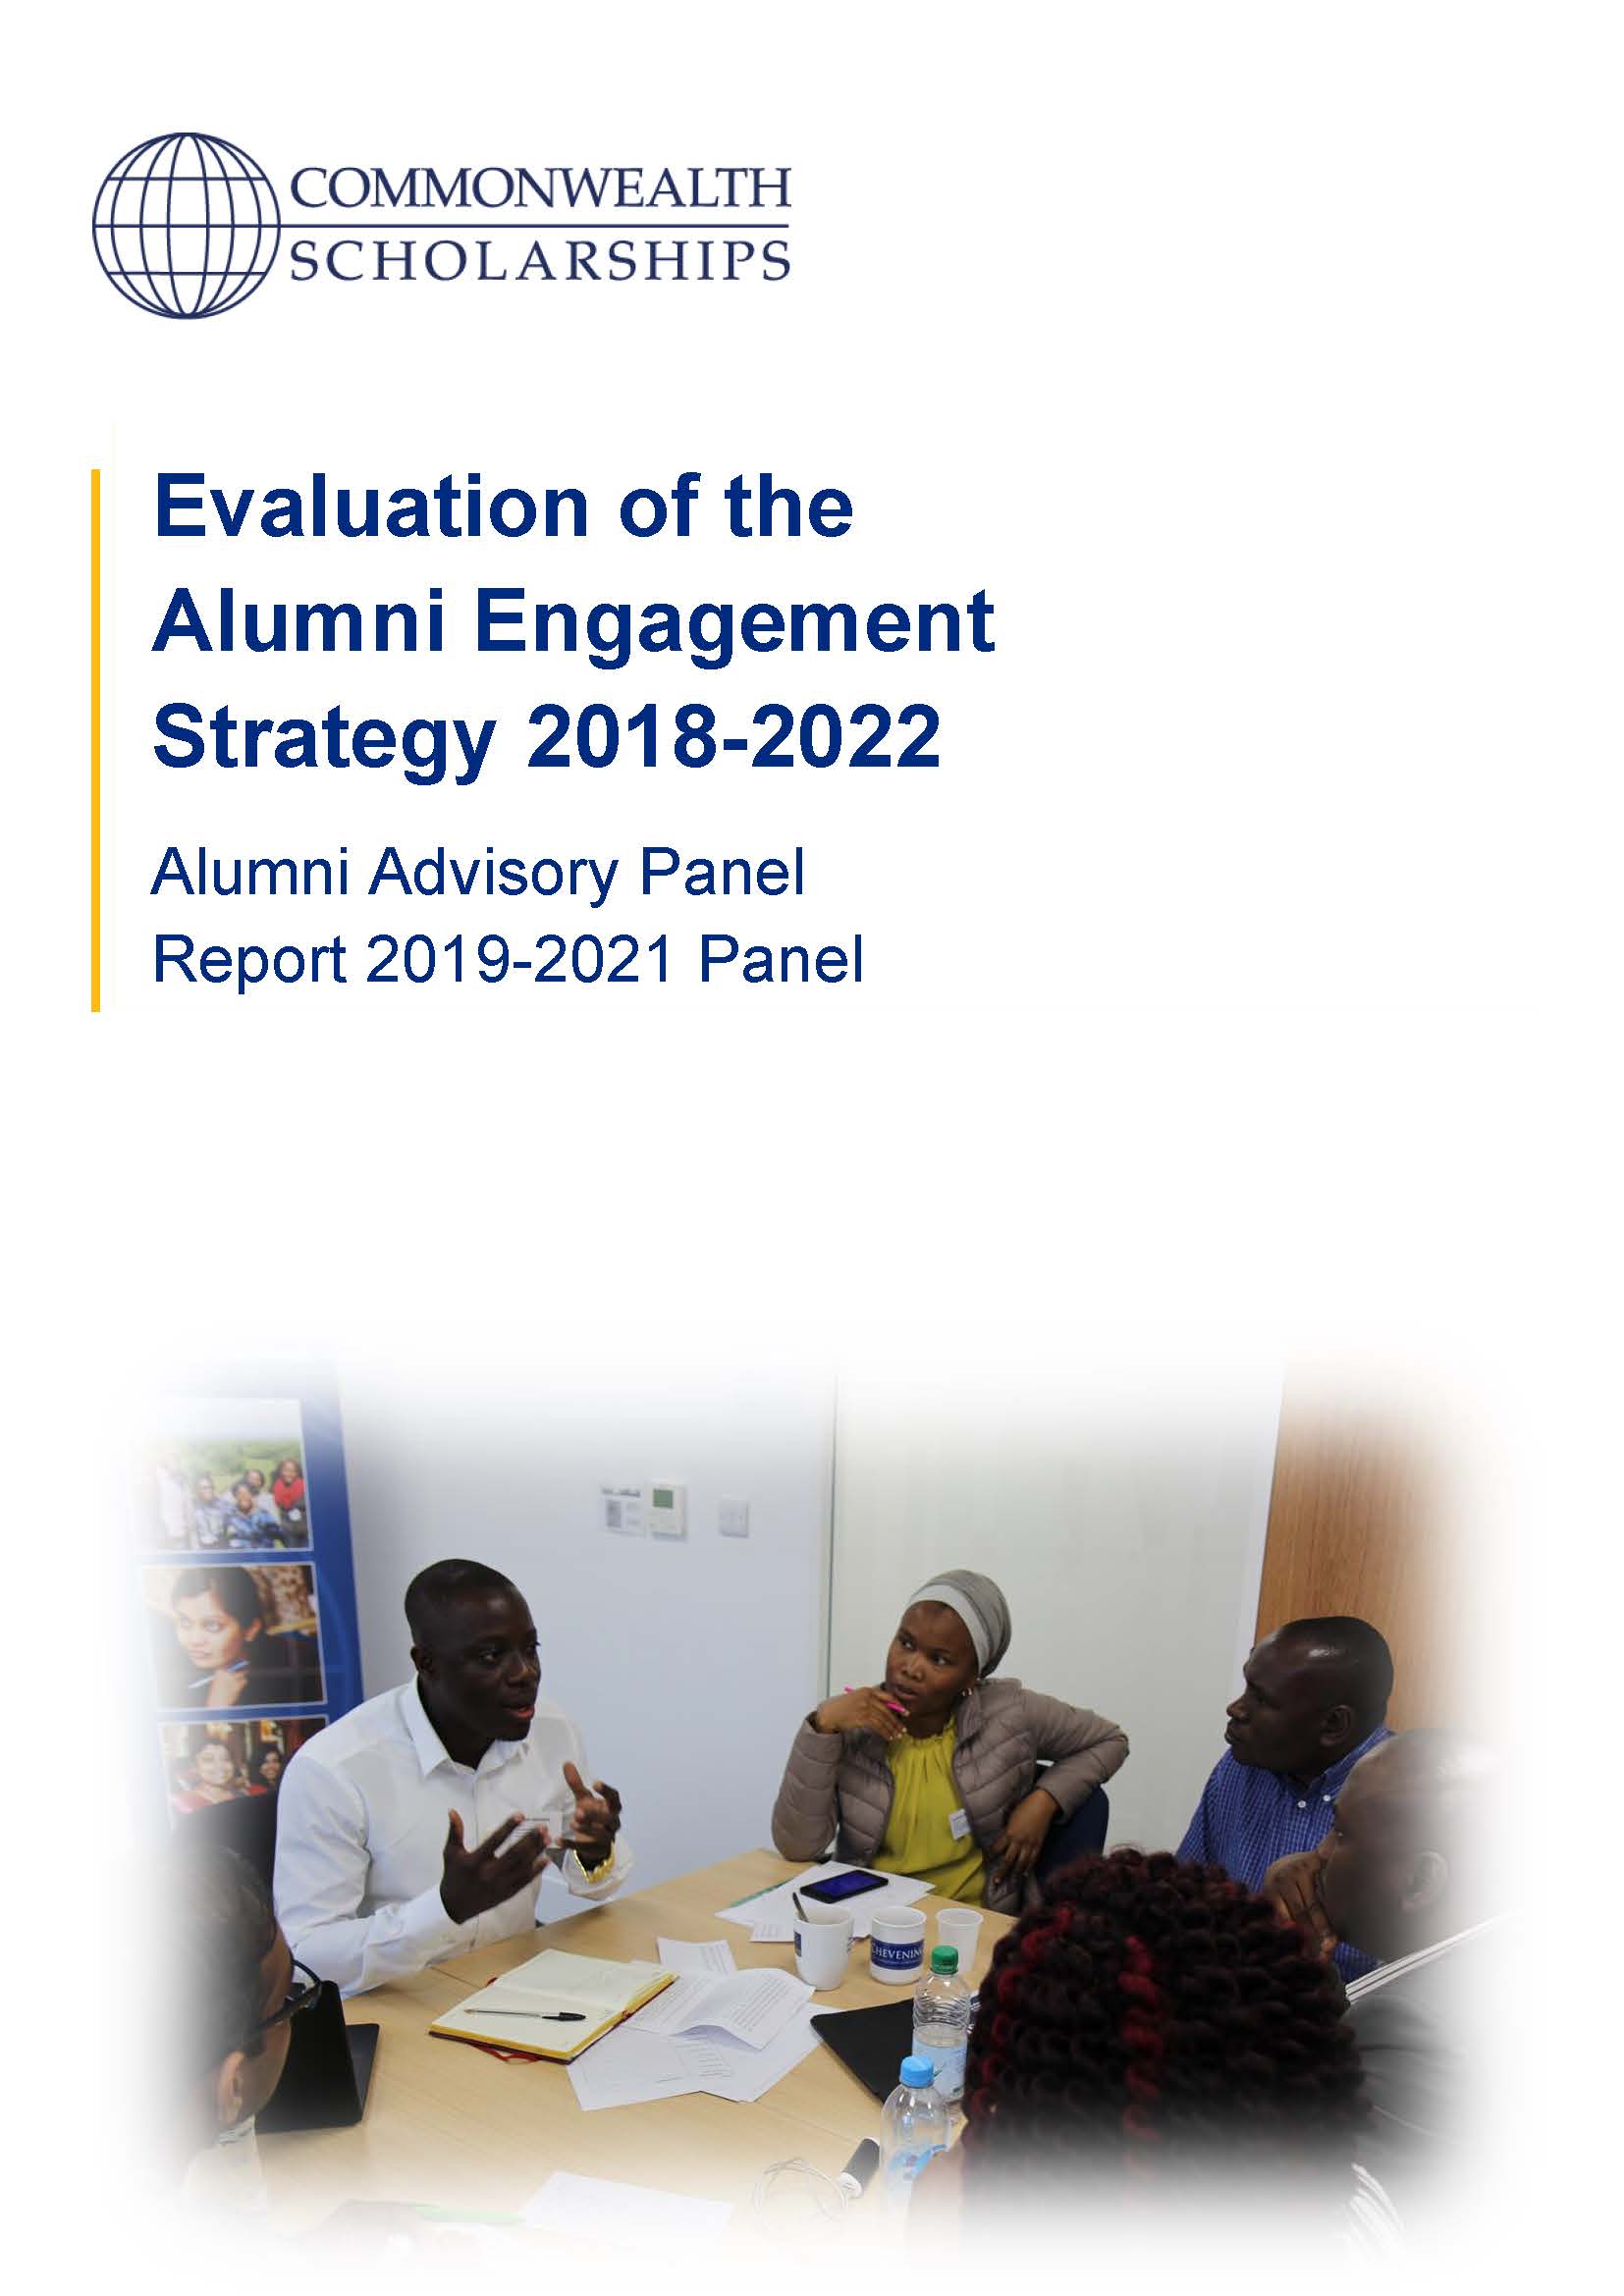 Evaluation of the Alumni Engagement Strategy